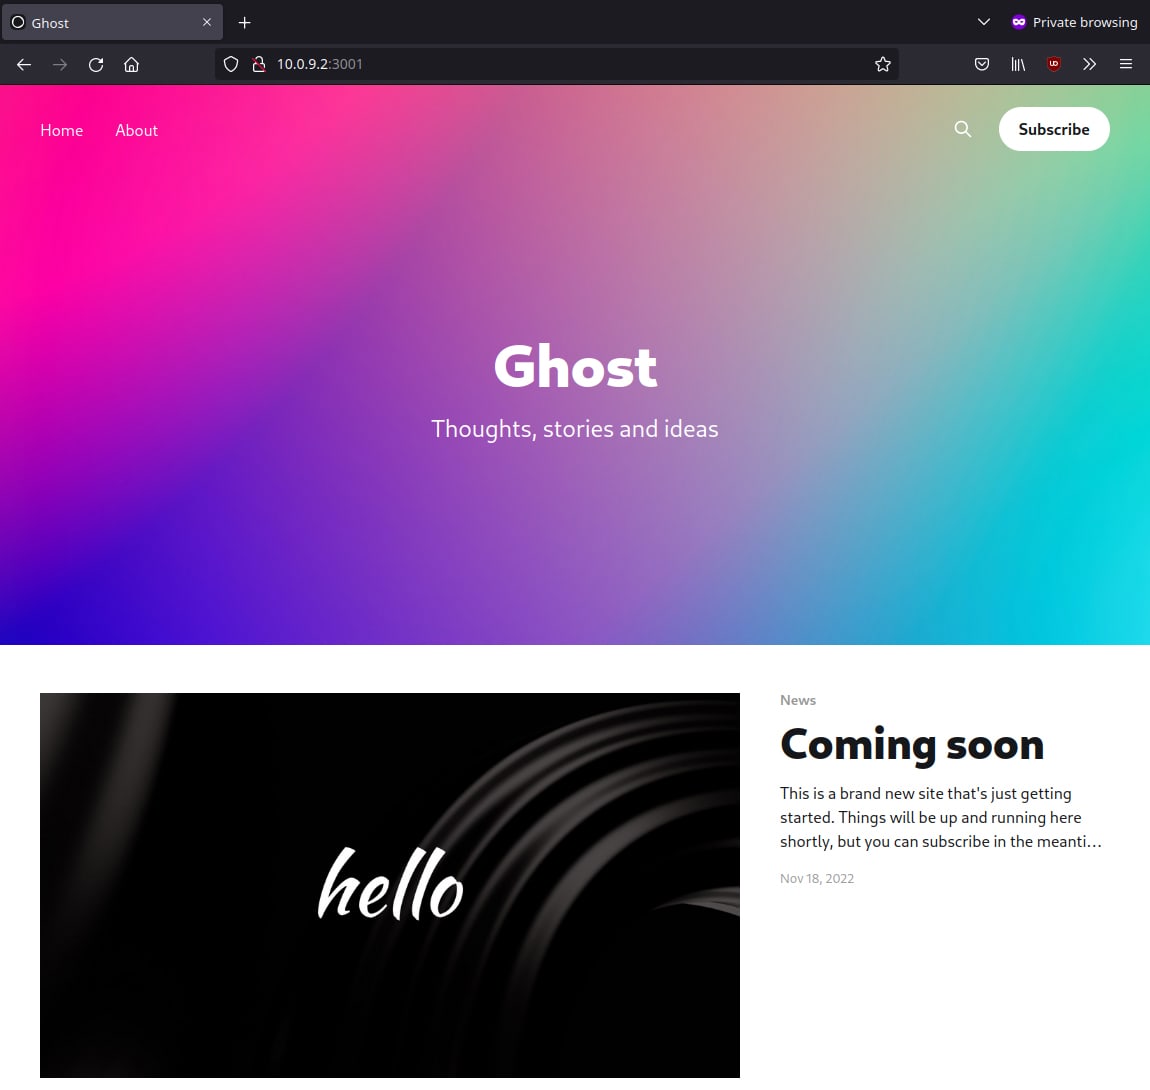 Screenshot of Ghost site with Coming Soon messaging